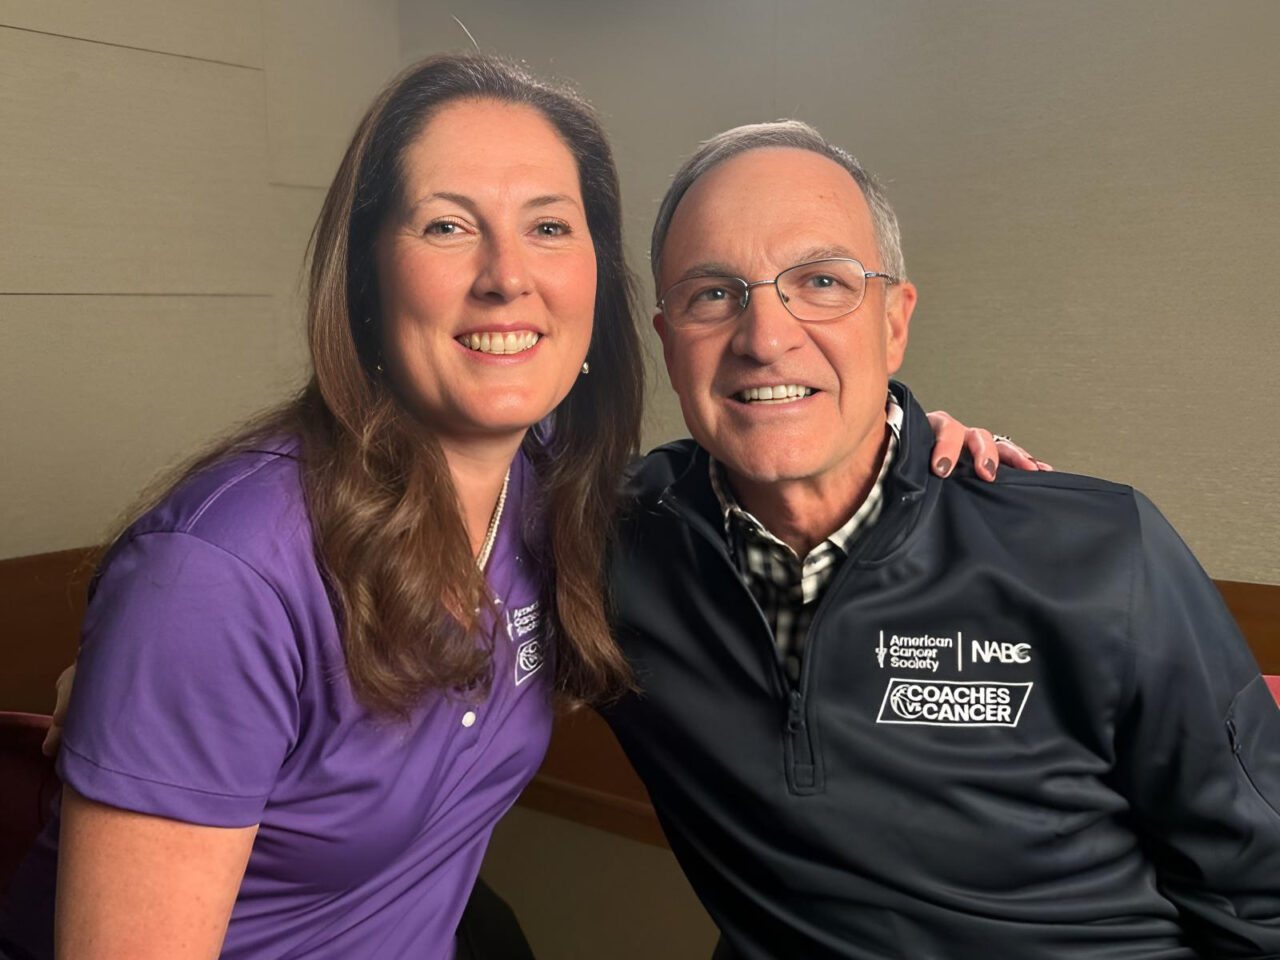 Karen Knudsen: Behind the scenes at the Final Four with my good friend and Coaches vs Cancer Council Chair Lon Kruger